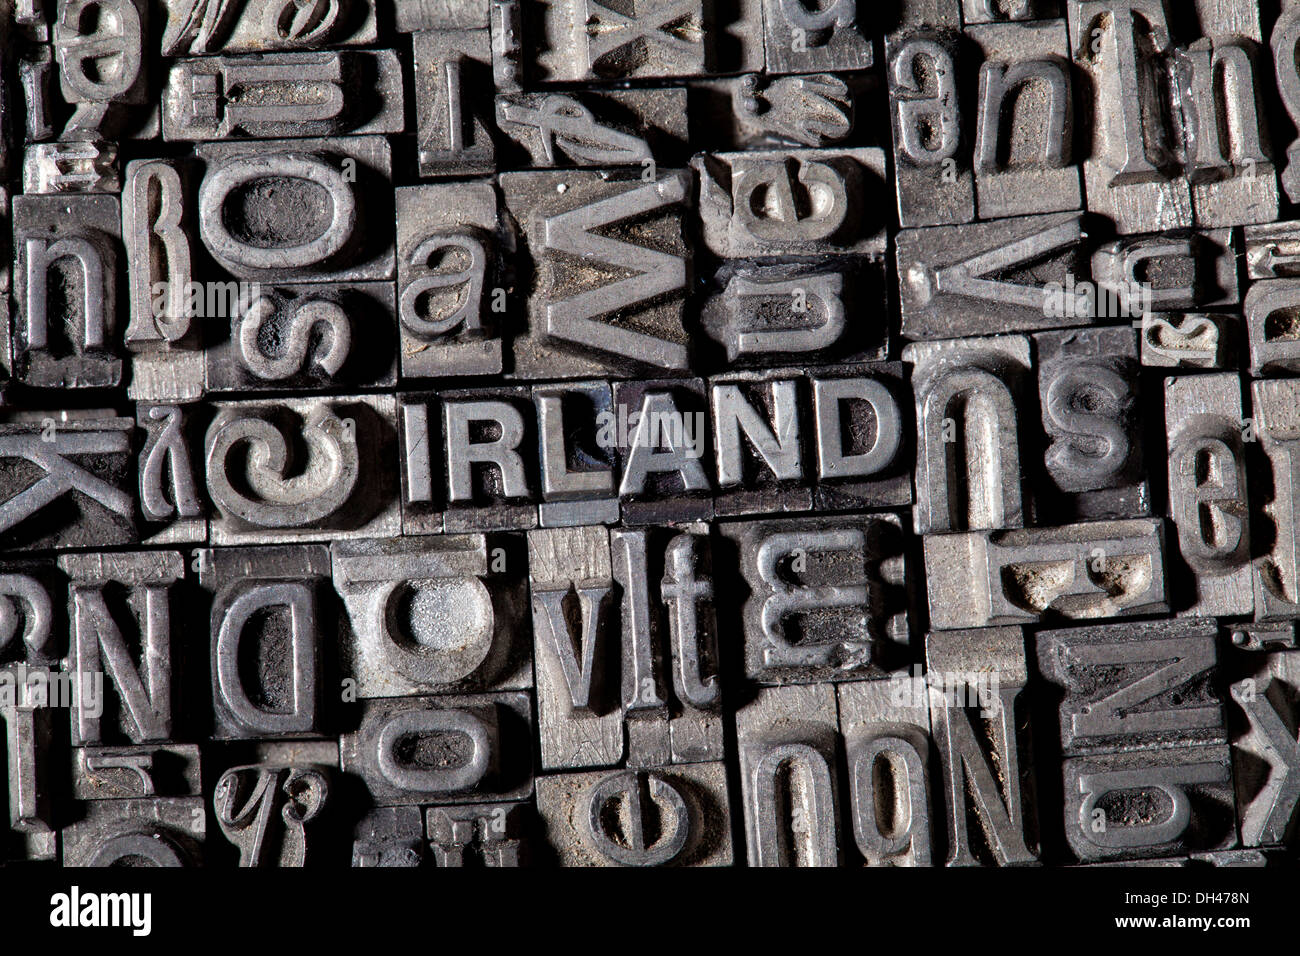 Old lead letters forming the word 'IRLAND', German for 'IRELAND' Stock Photo